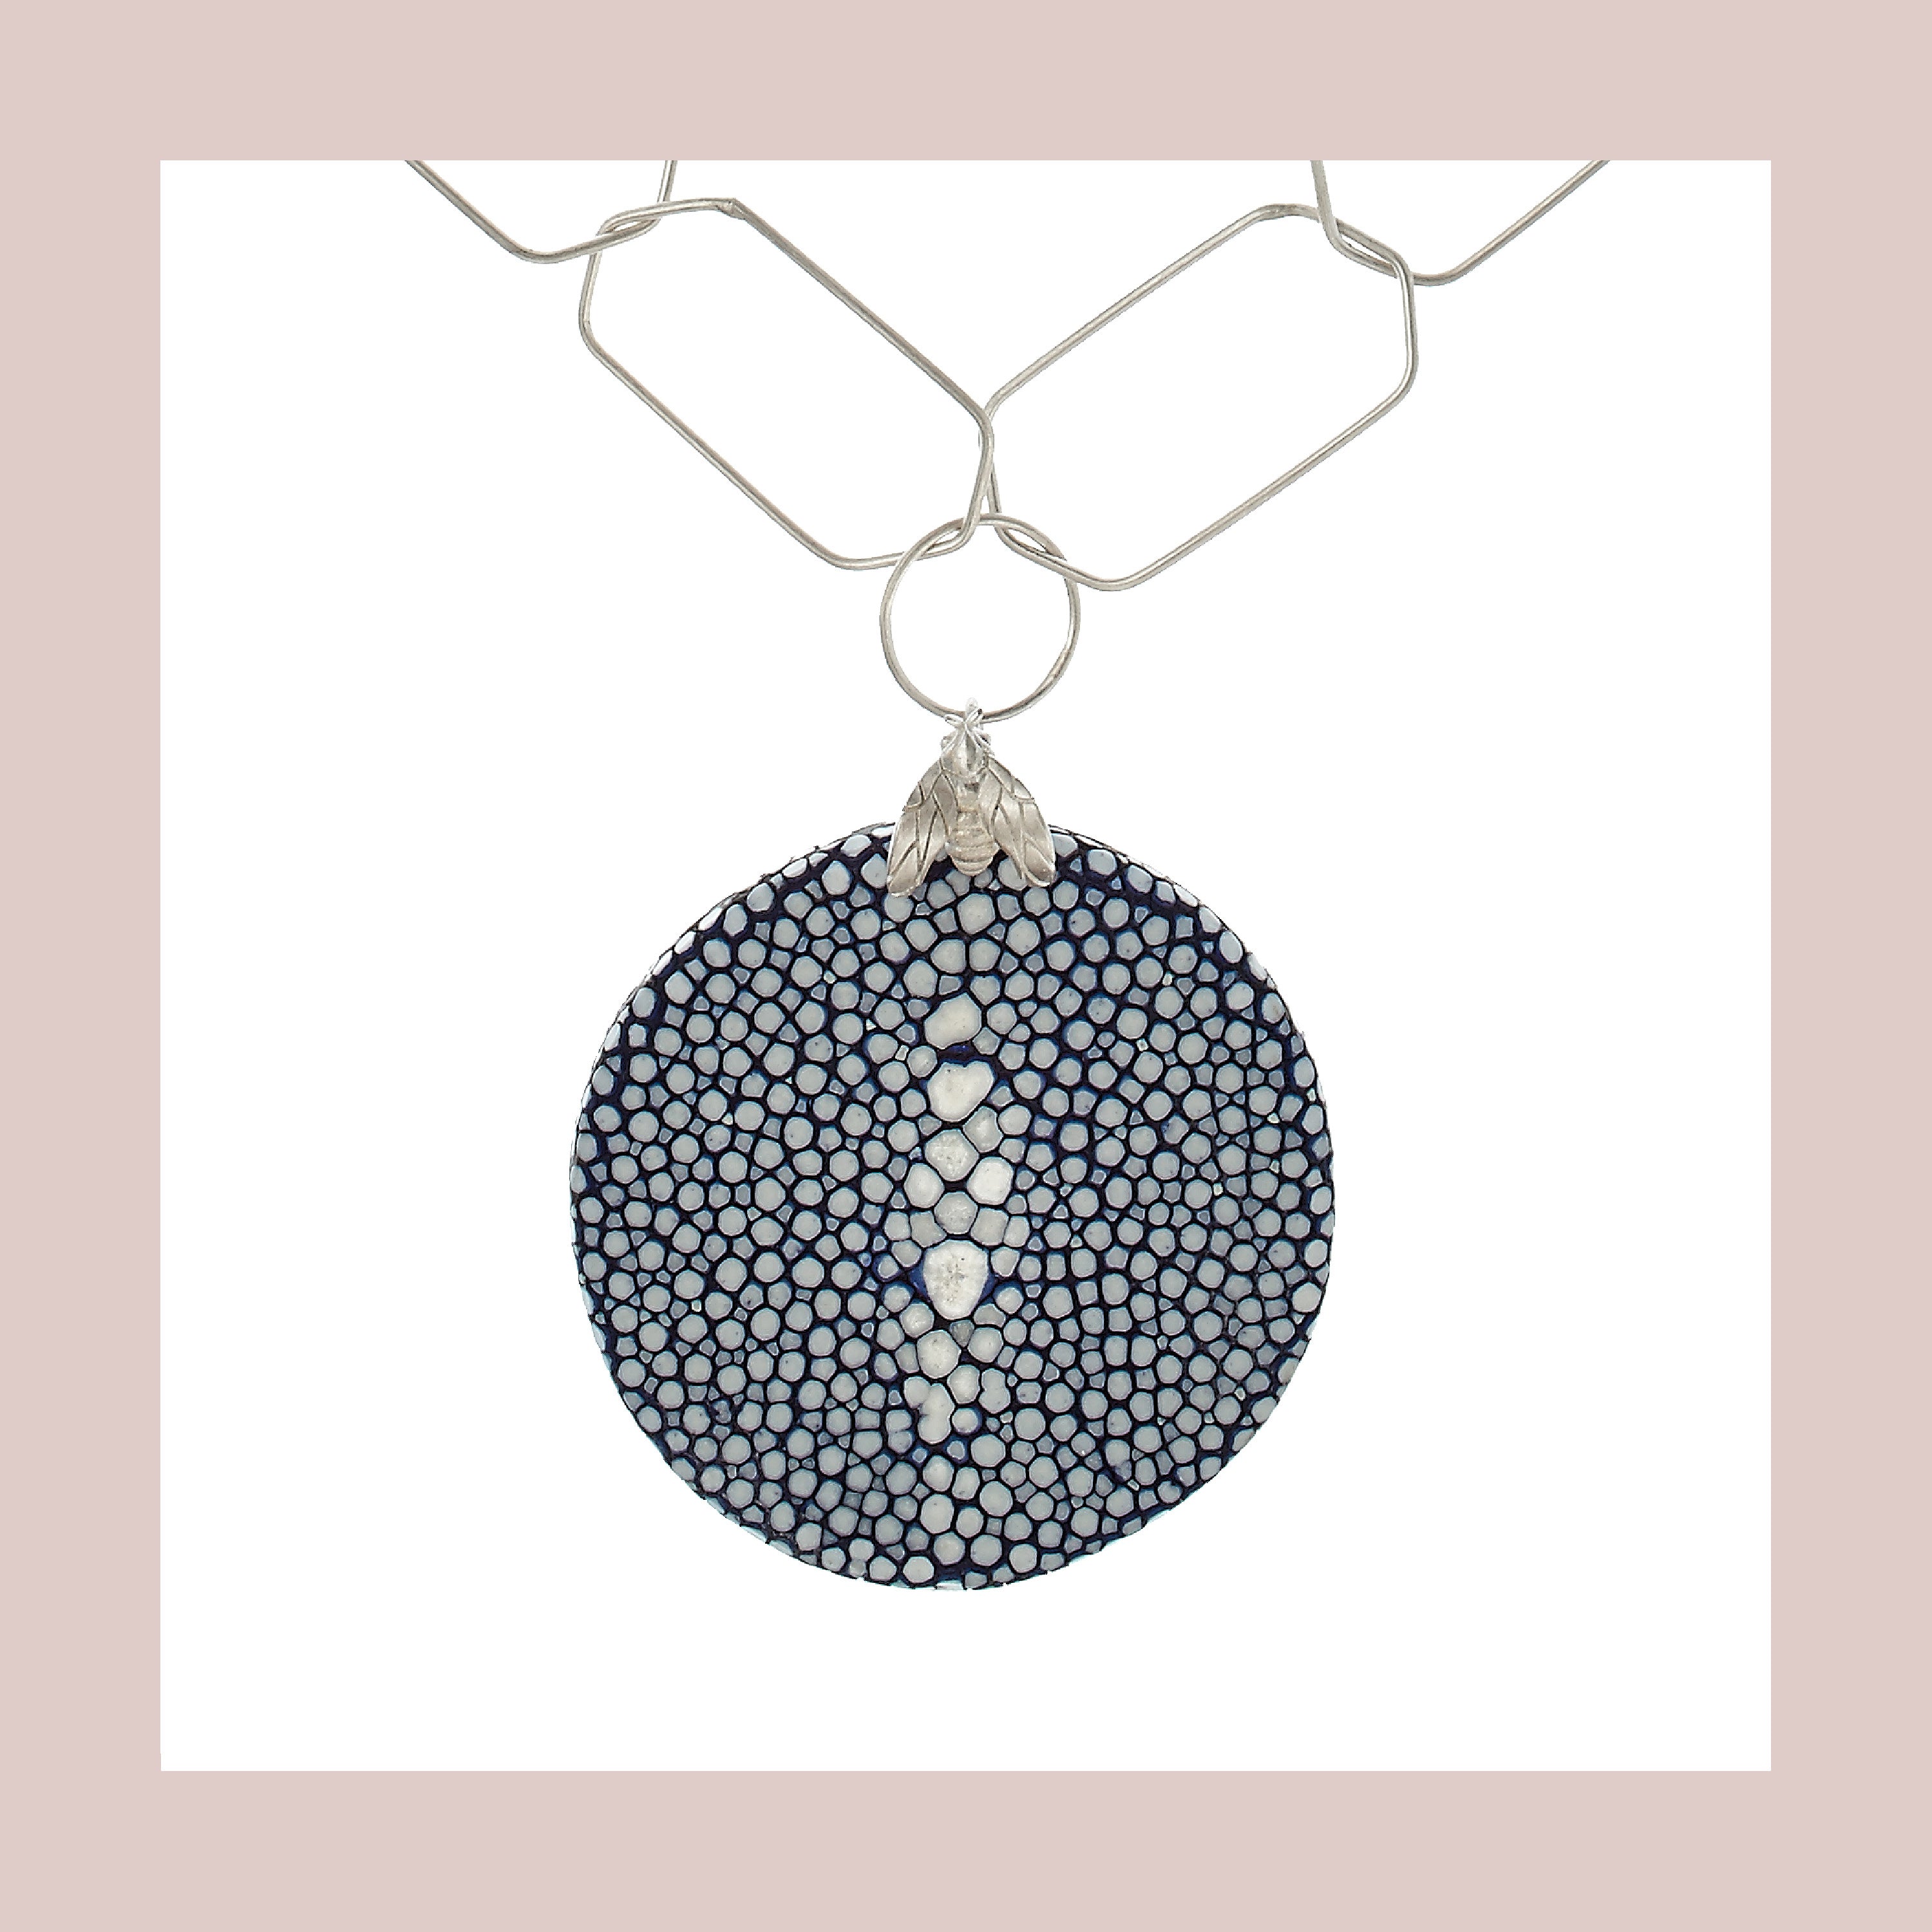 Bee Queen Large-Link Necklace with Galuchat Disc